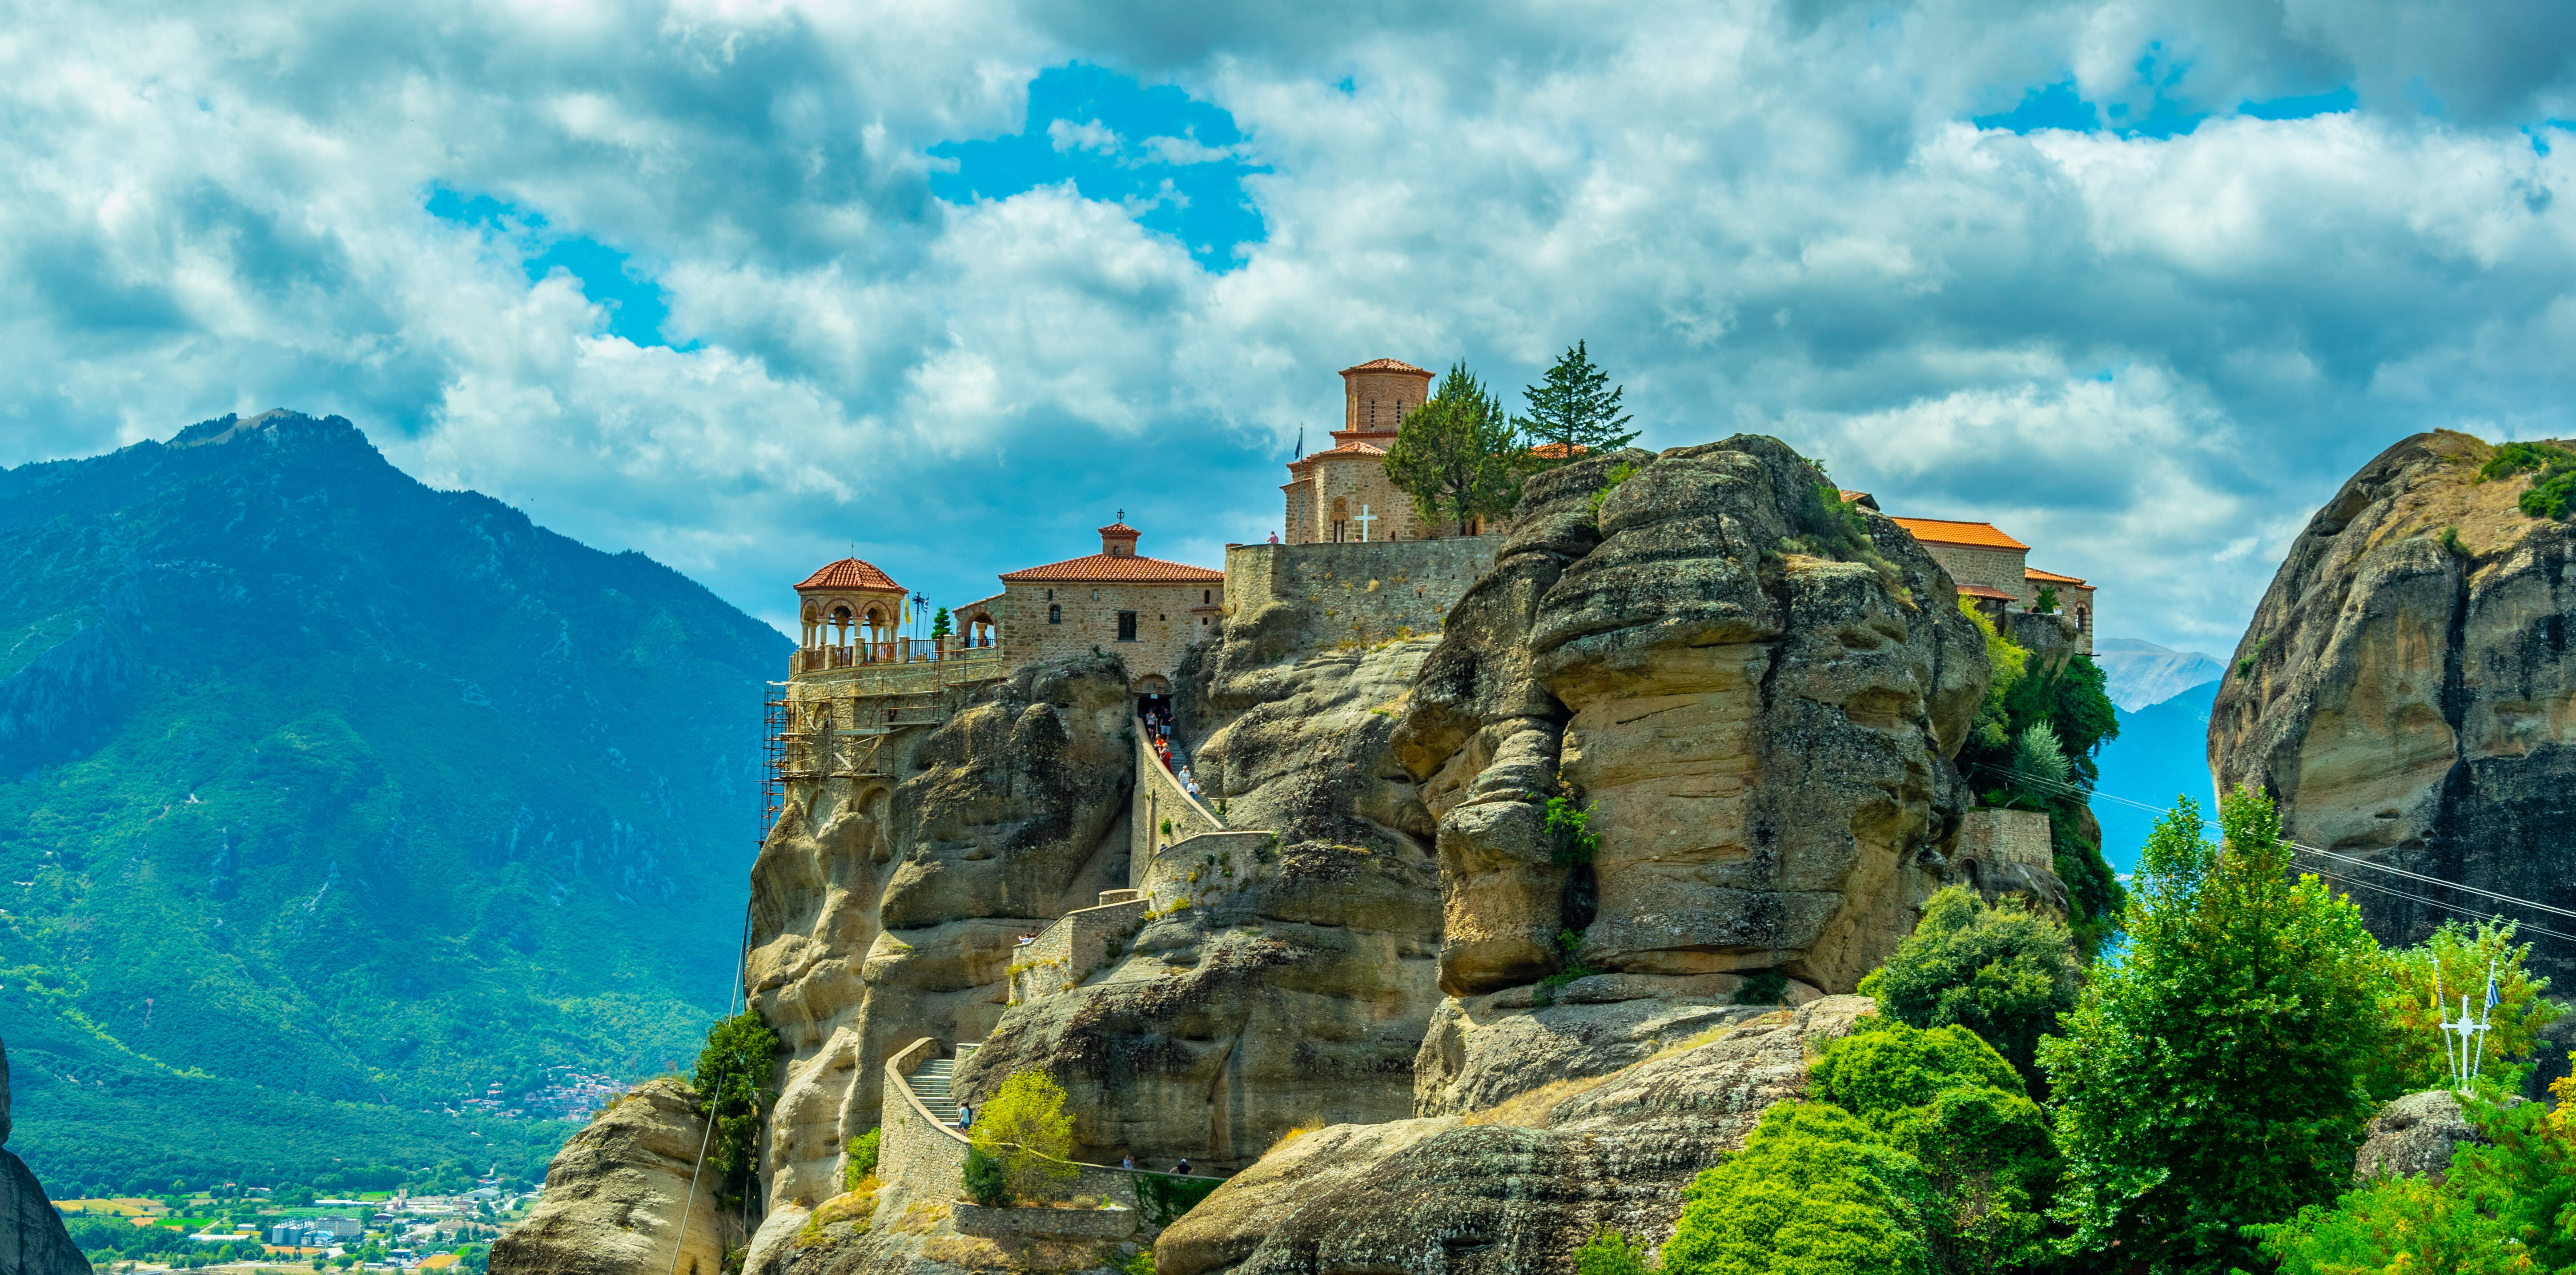 Delphi and Meteora tour is worth visiting. From 1 day or up to 3 days